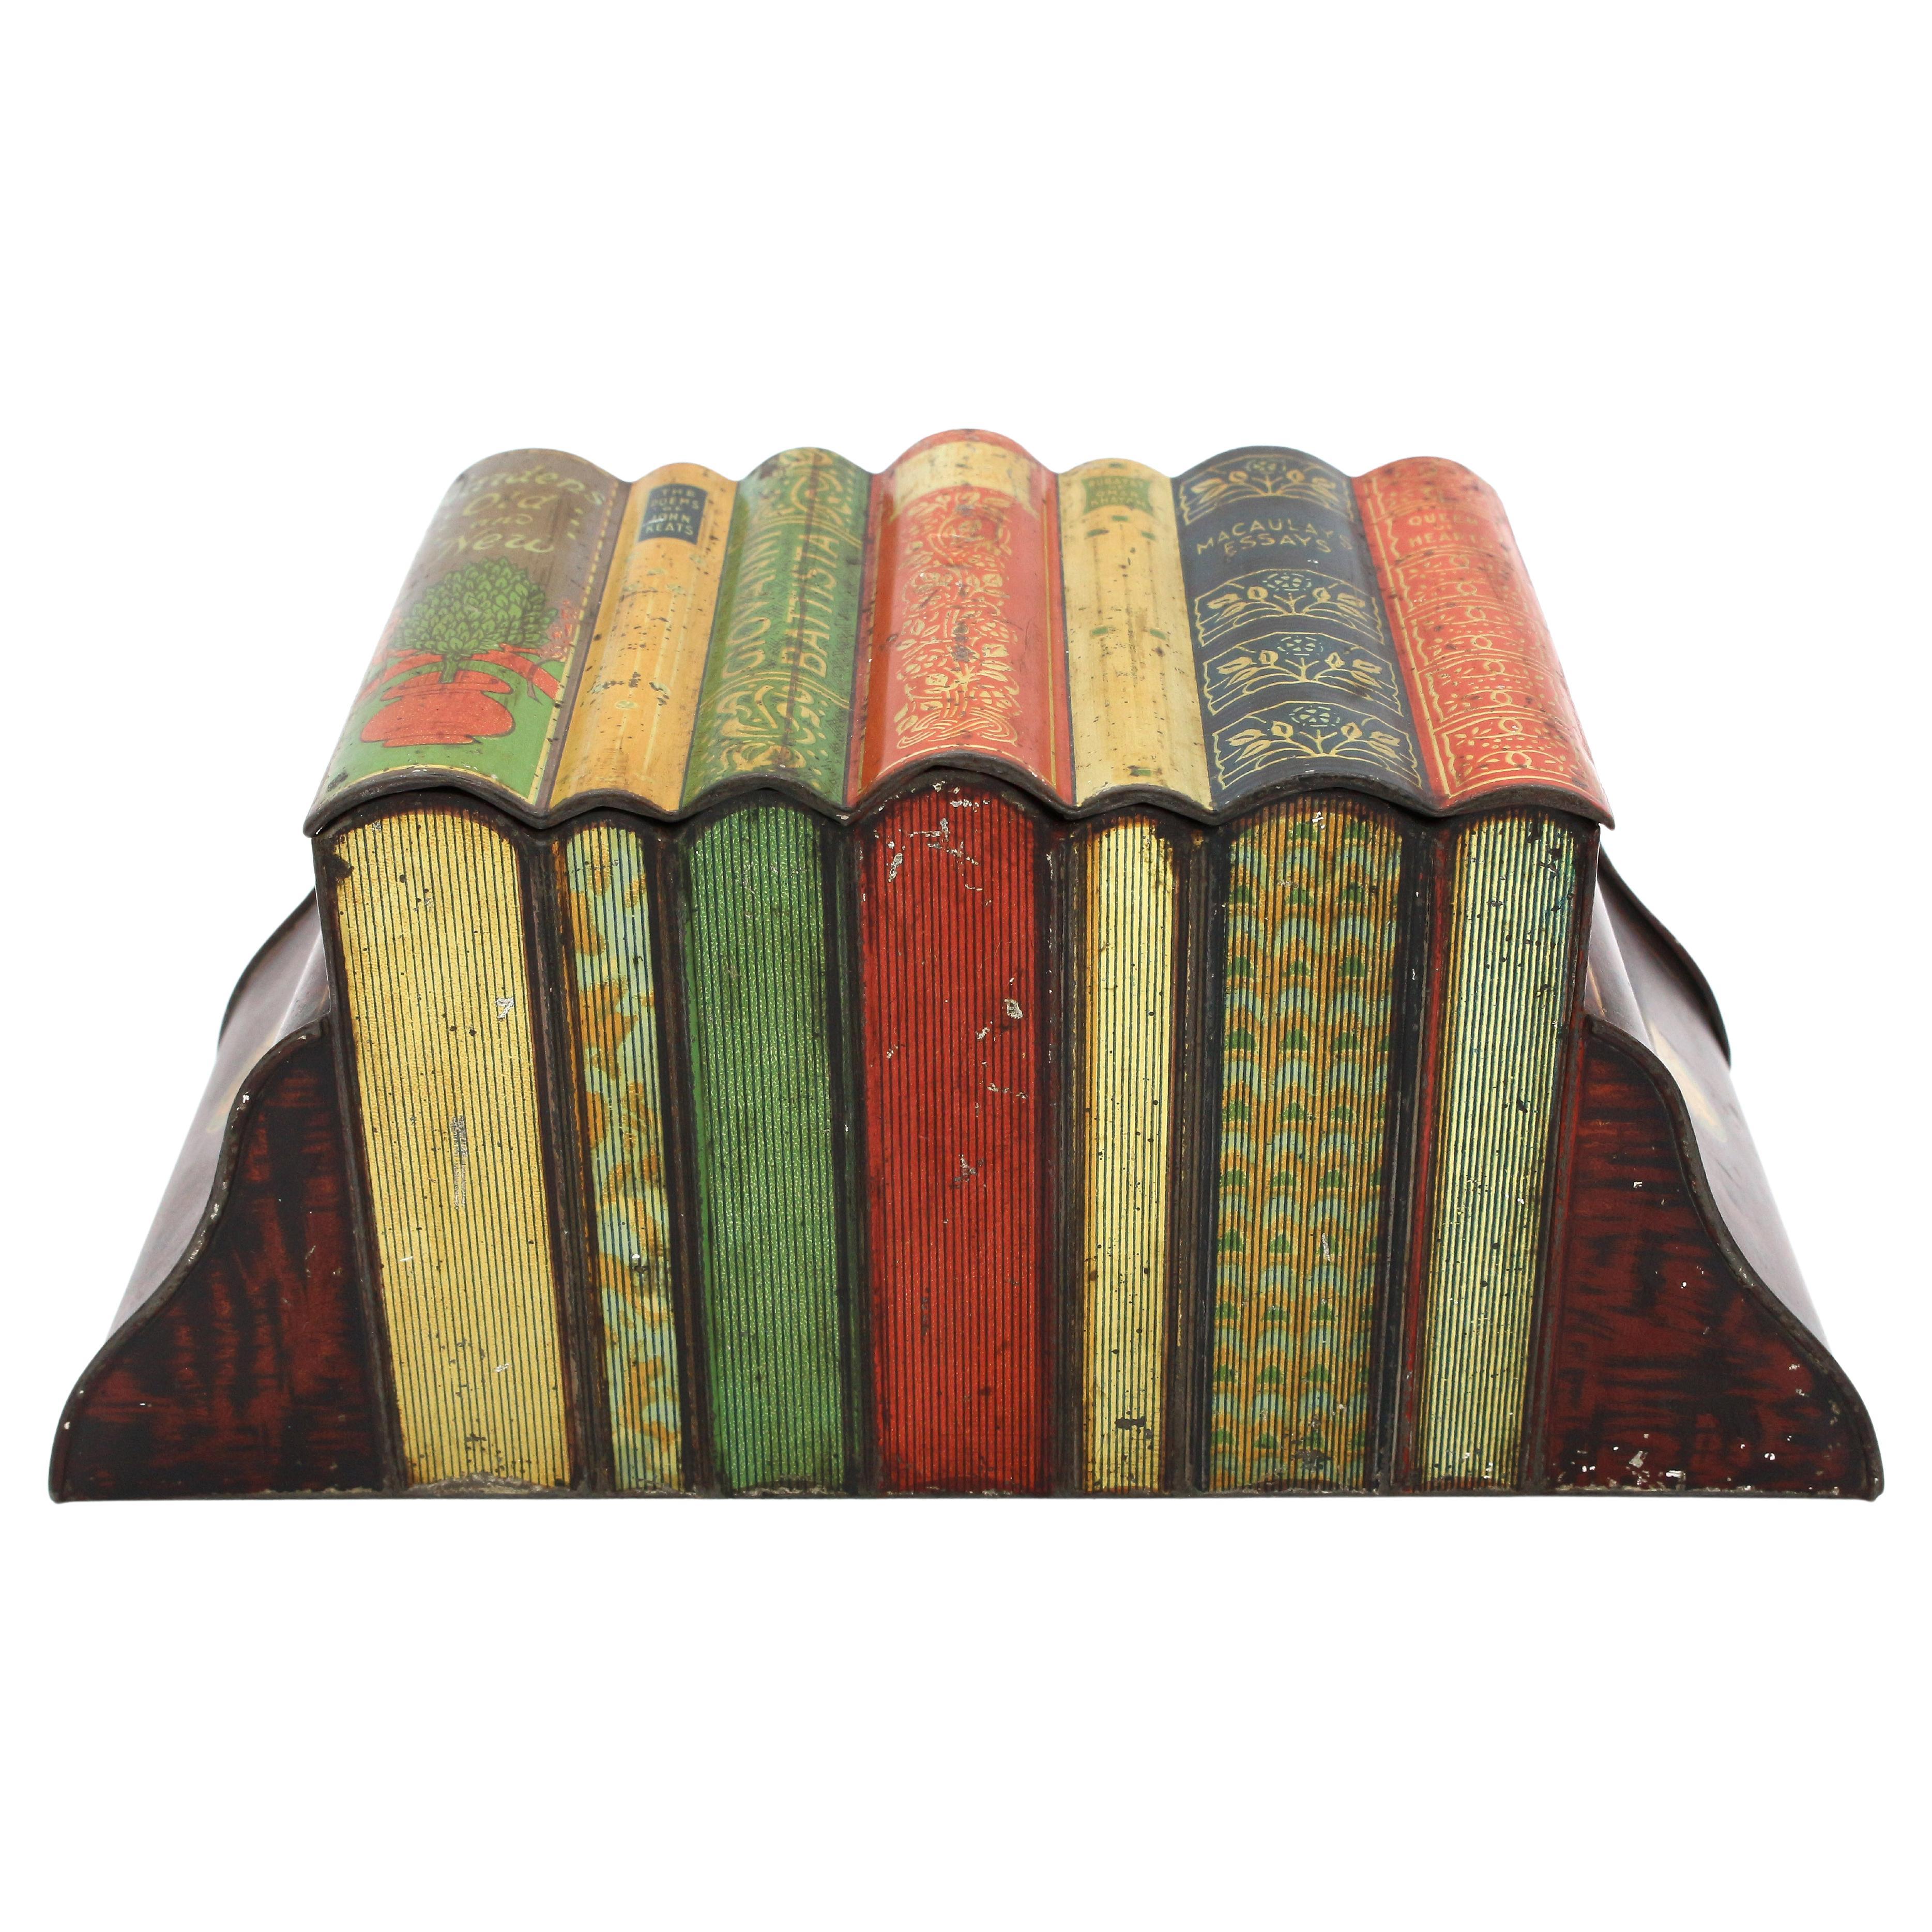 Early 20th Century Books & Bookend Form Biscuit Tin by Huntley & Palmers For Sale